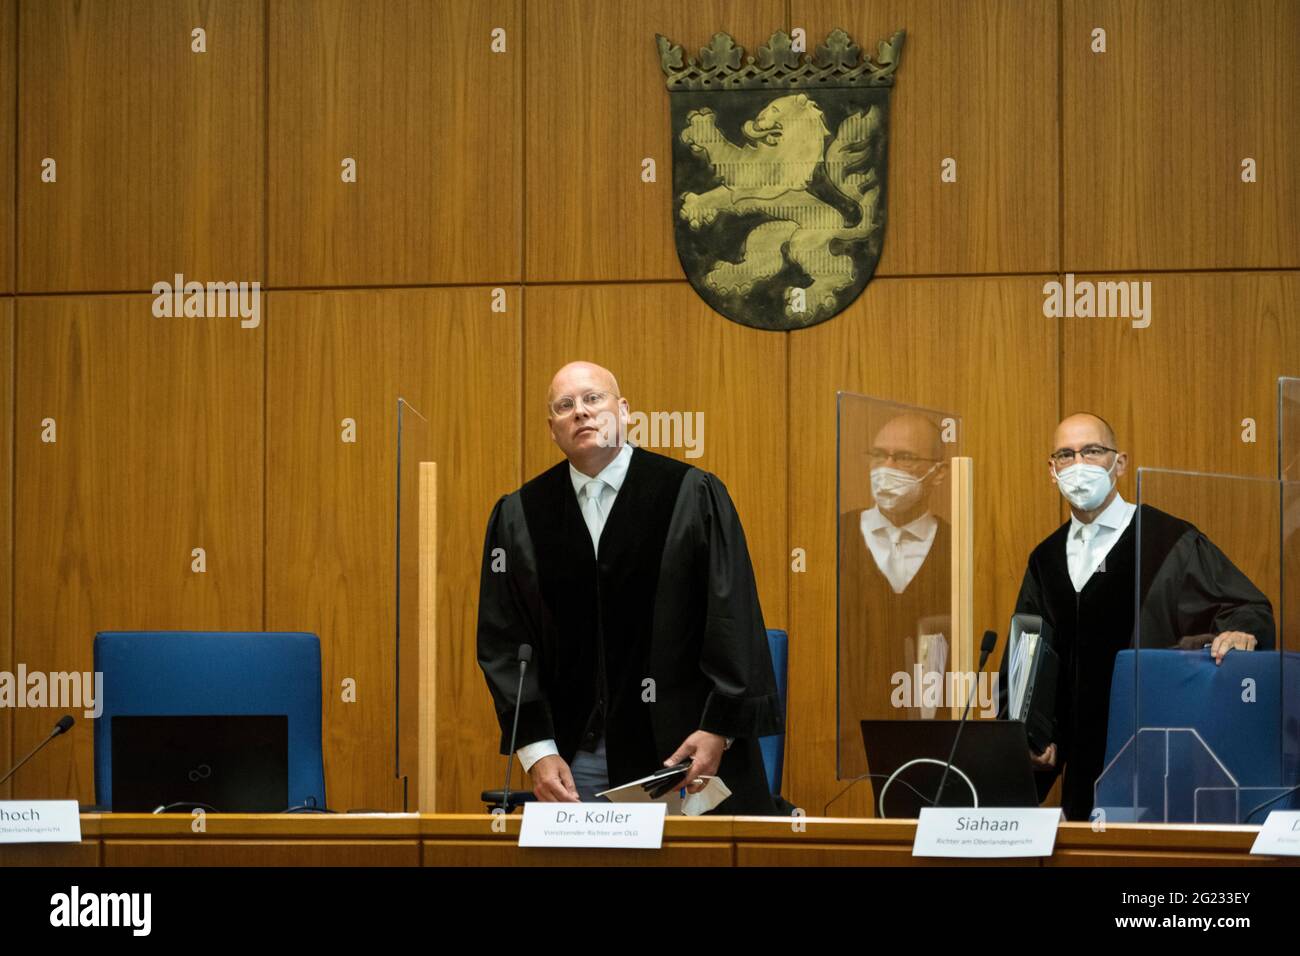 08 June 2021, Hessen, Frankfurt/Main: Presiding Judge Christoph Koller (l) arrives for the third day of the trial against Franco A. at Frankfurt Higher Regional Court (OLG). The defendant is alleged to have procured weapons for alleged right-wing extremist motivation in order to carry out attacks. According to the indictment, he posed as a Syrian in order to draw suspicion to refugees. Photo: Thomas Lohnes/Getty Images Europe/Pool/dpa Stock Photo